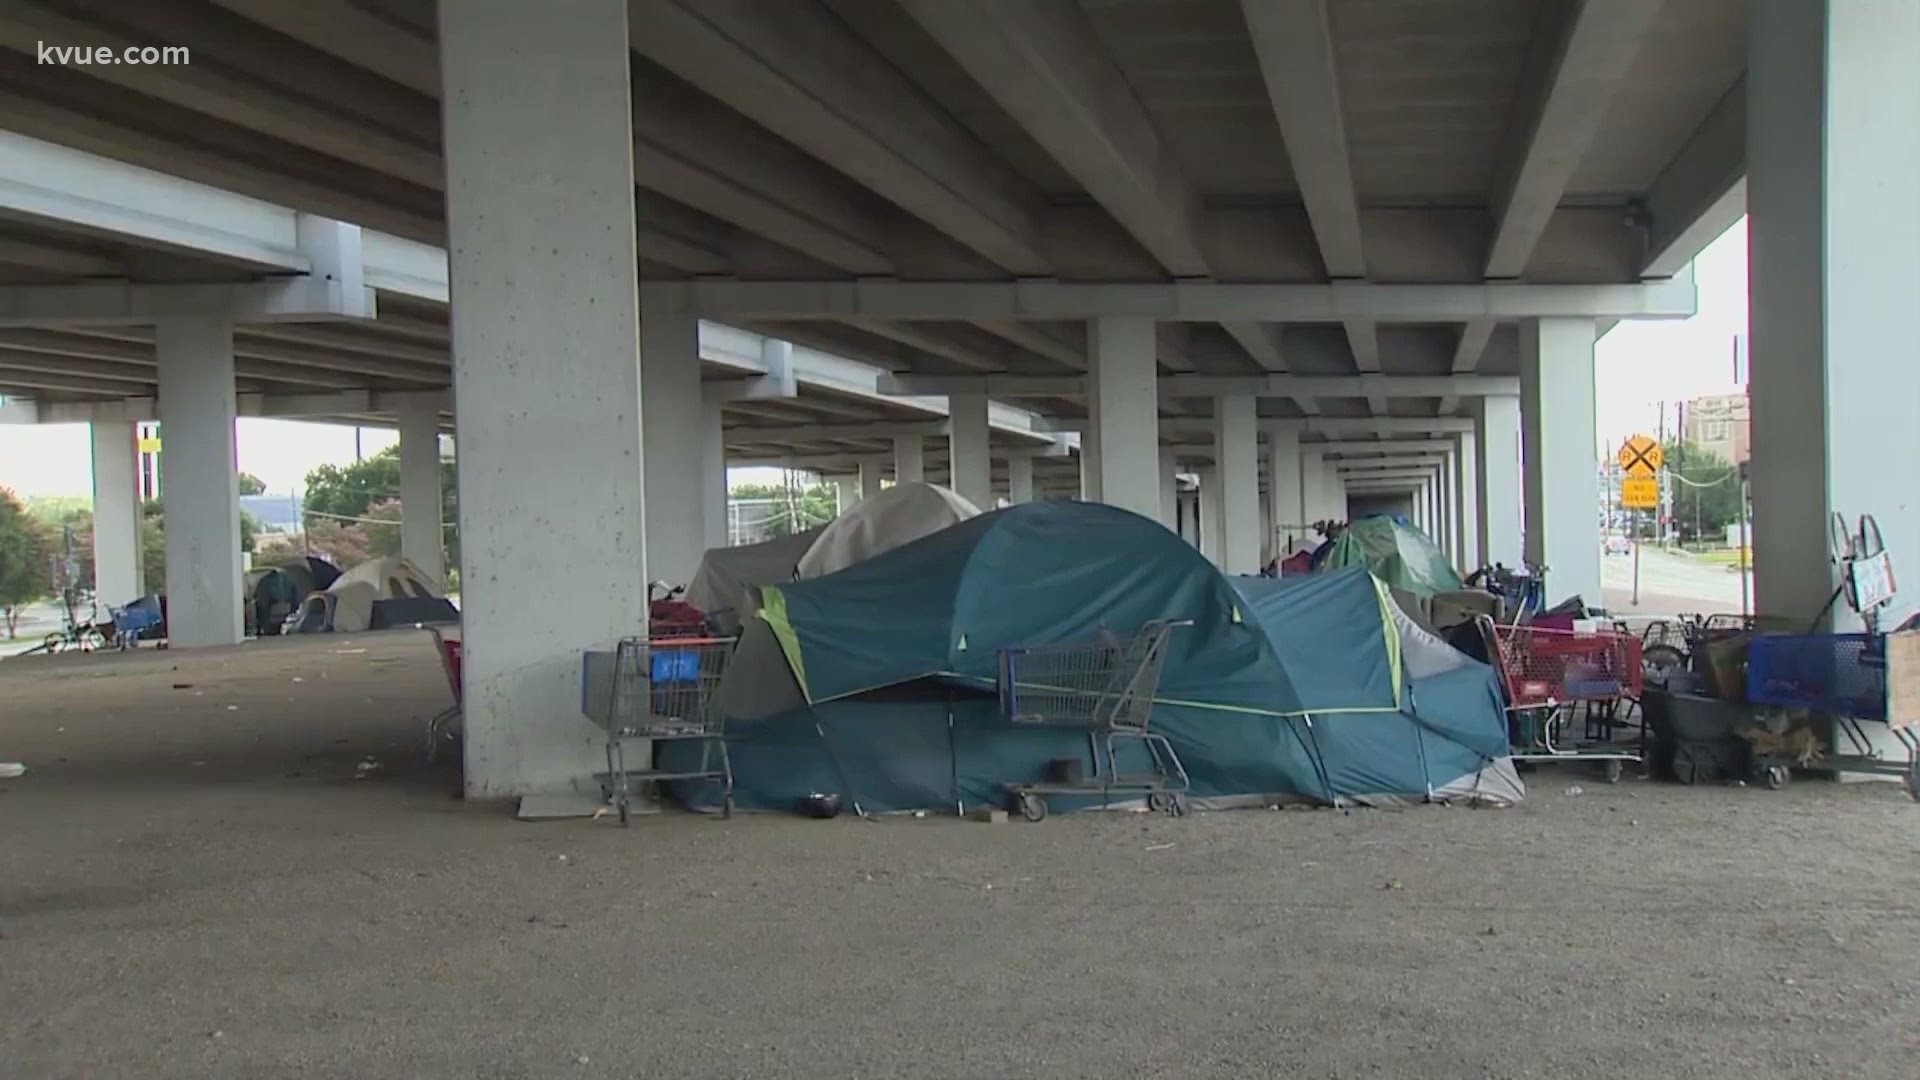 A bill to create a statewide camping bill didn't go far at the Capitol Monday.